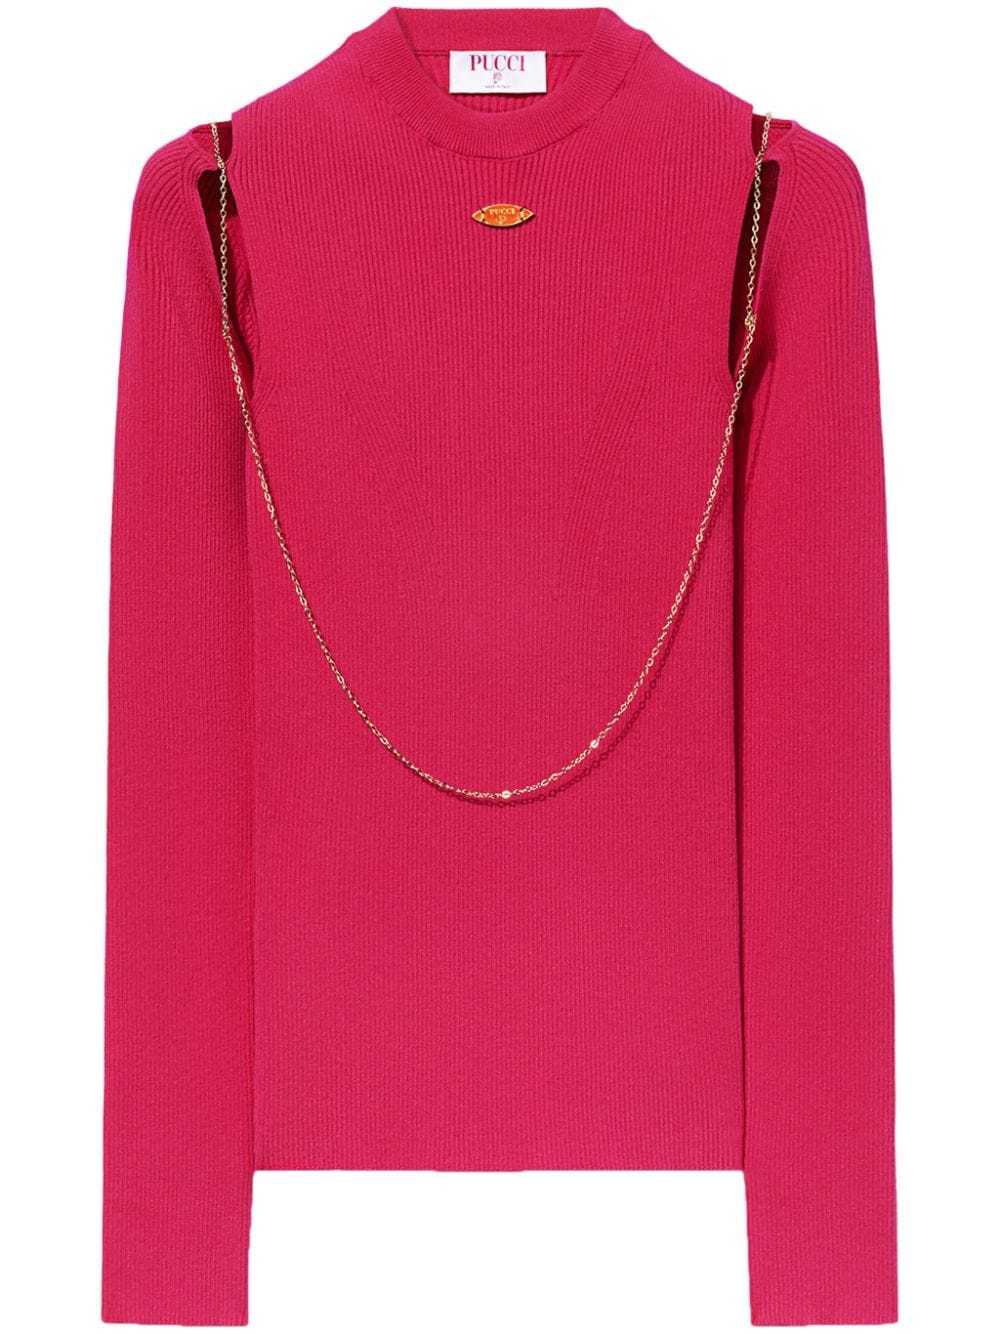 Pucci Chain-embellished Rib-knit Top In Pink